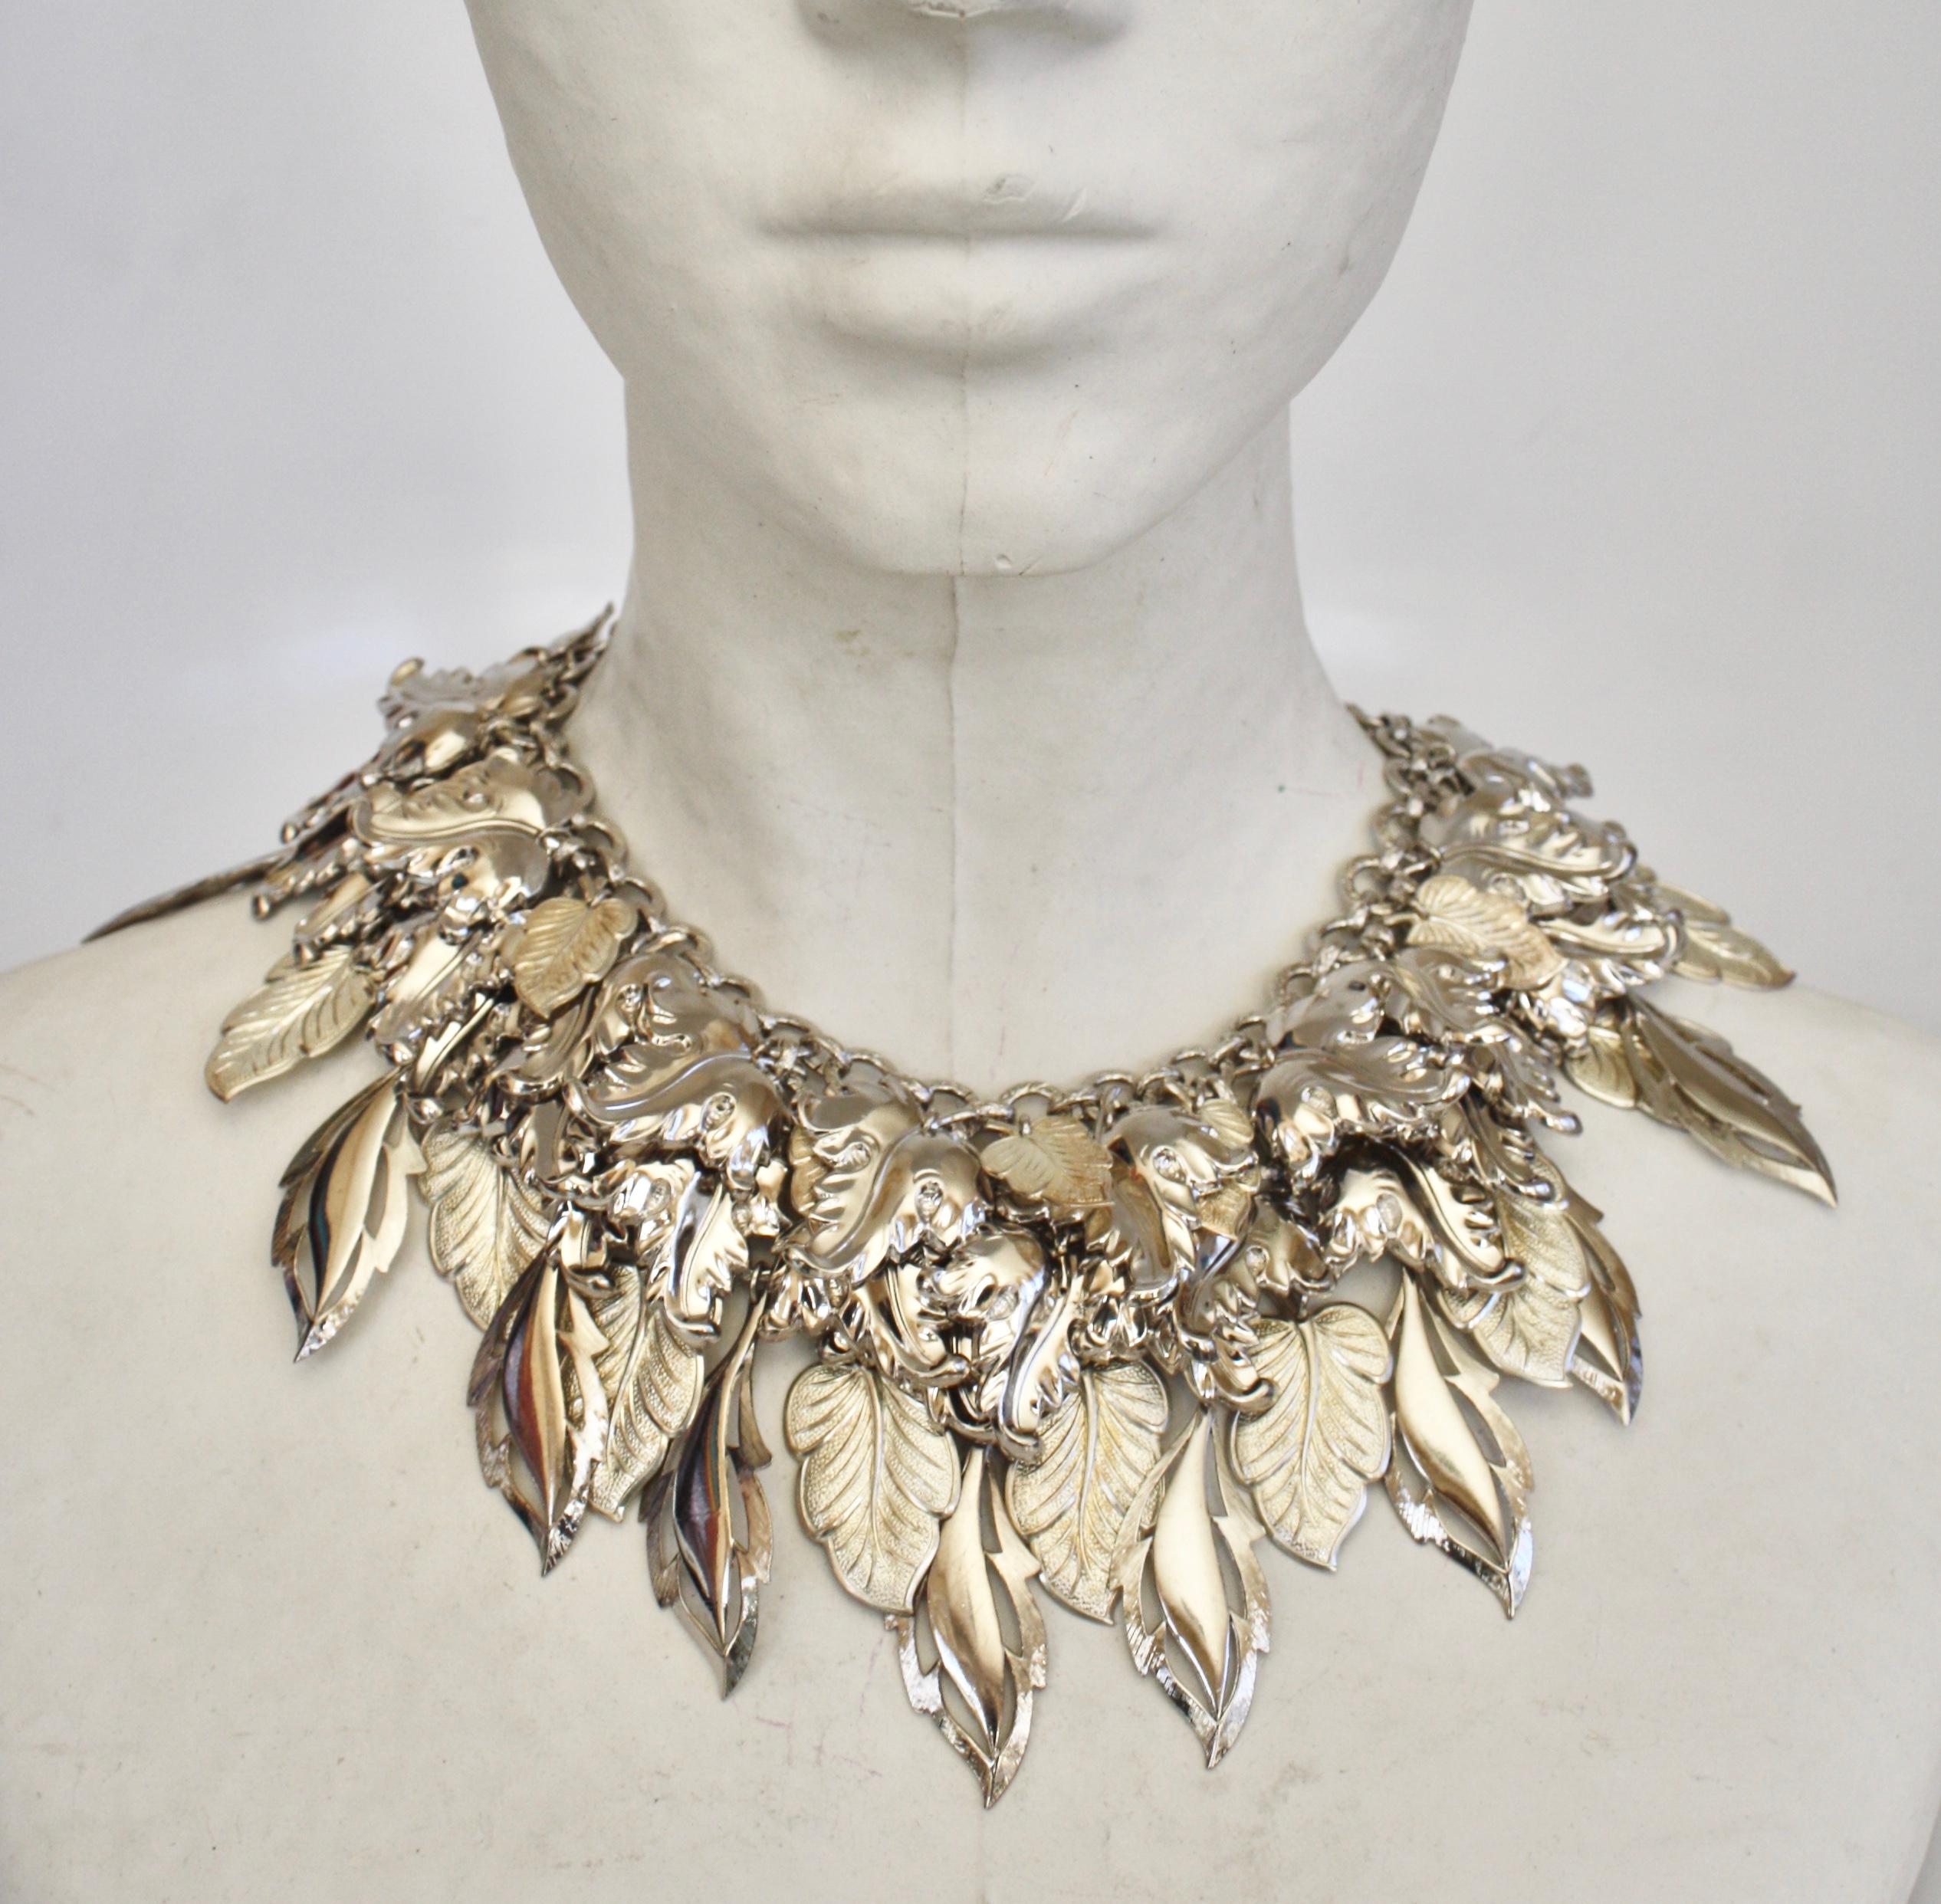 Rhodium charm statement necklace from French design house Francoise Montague. 